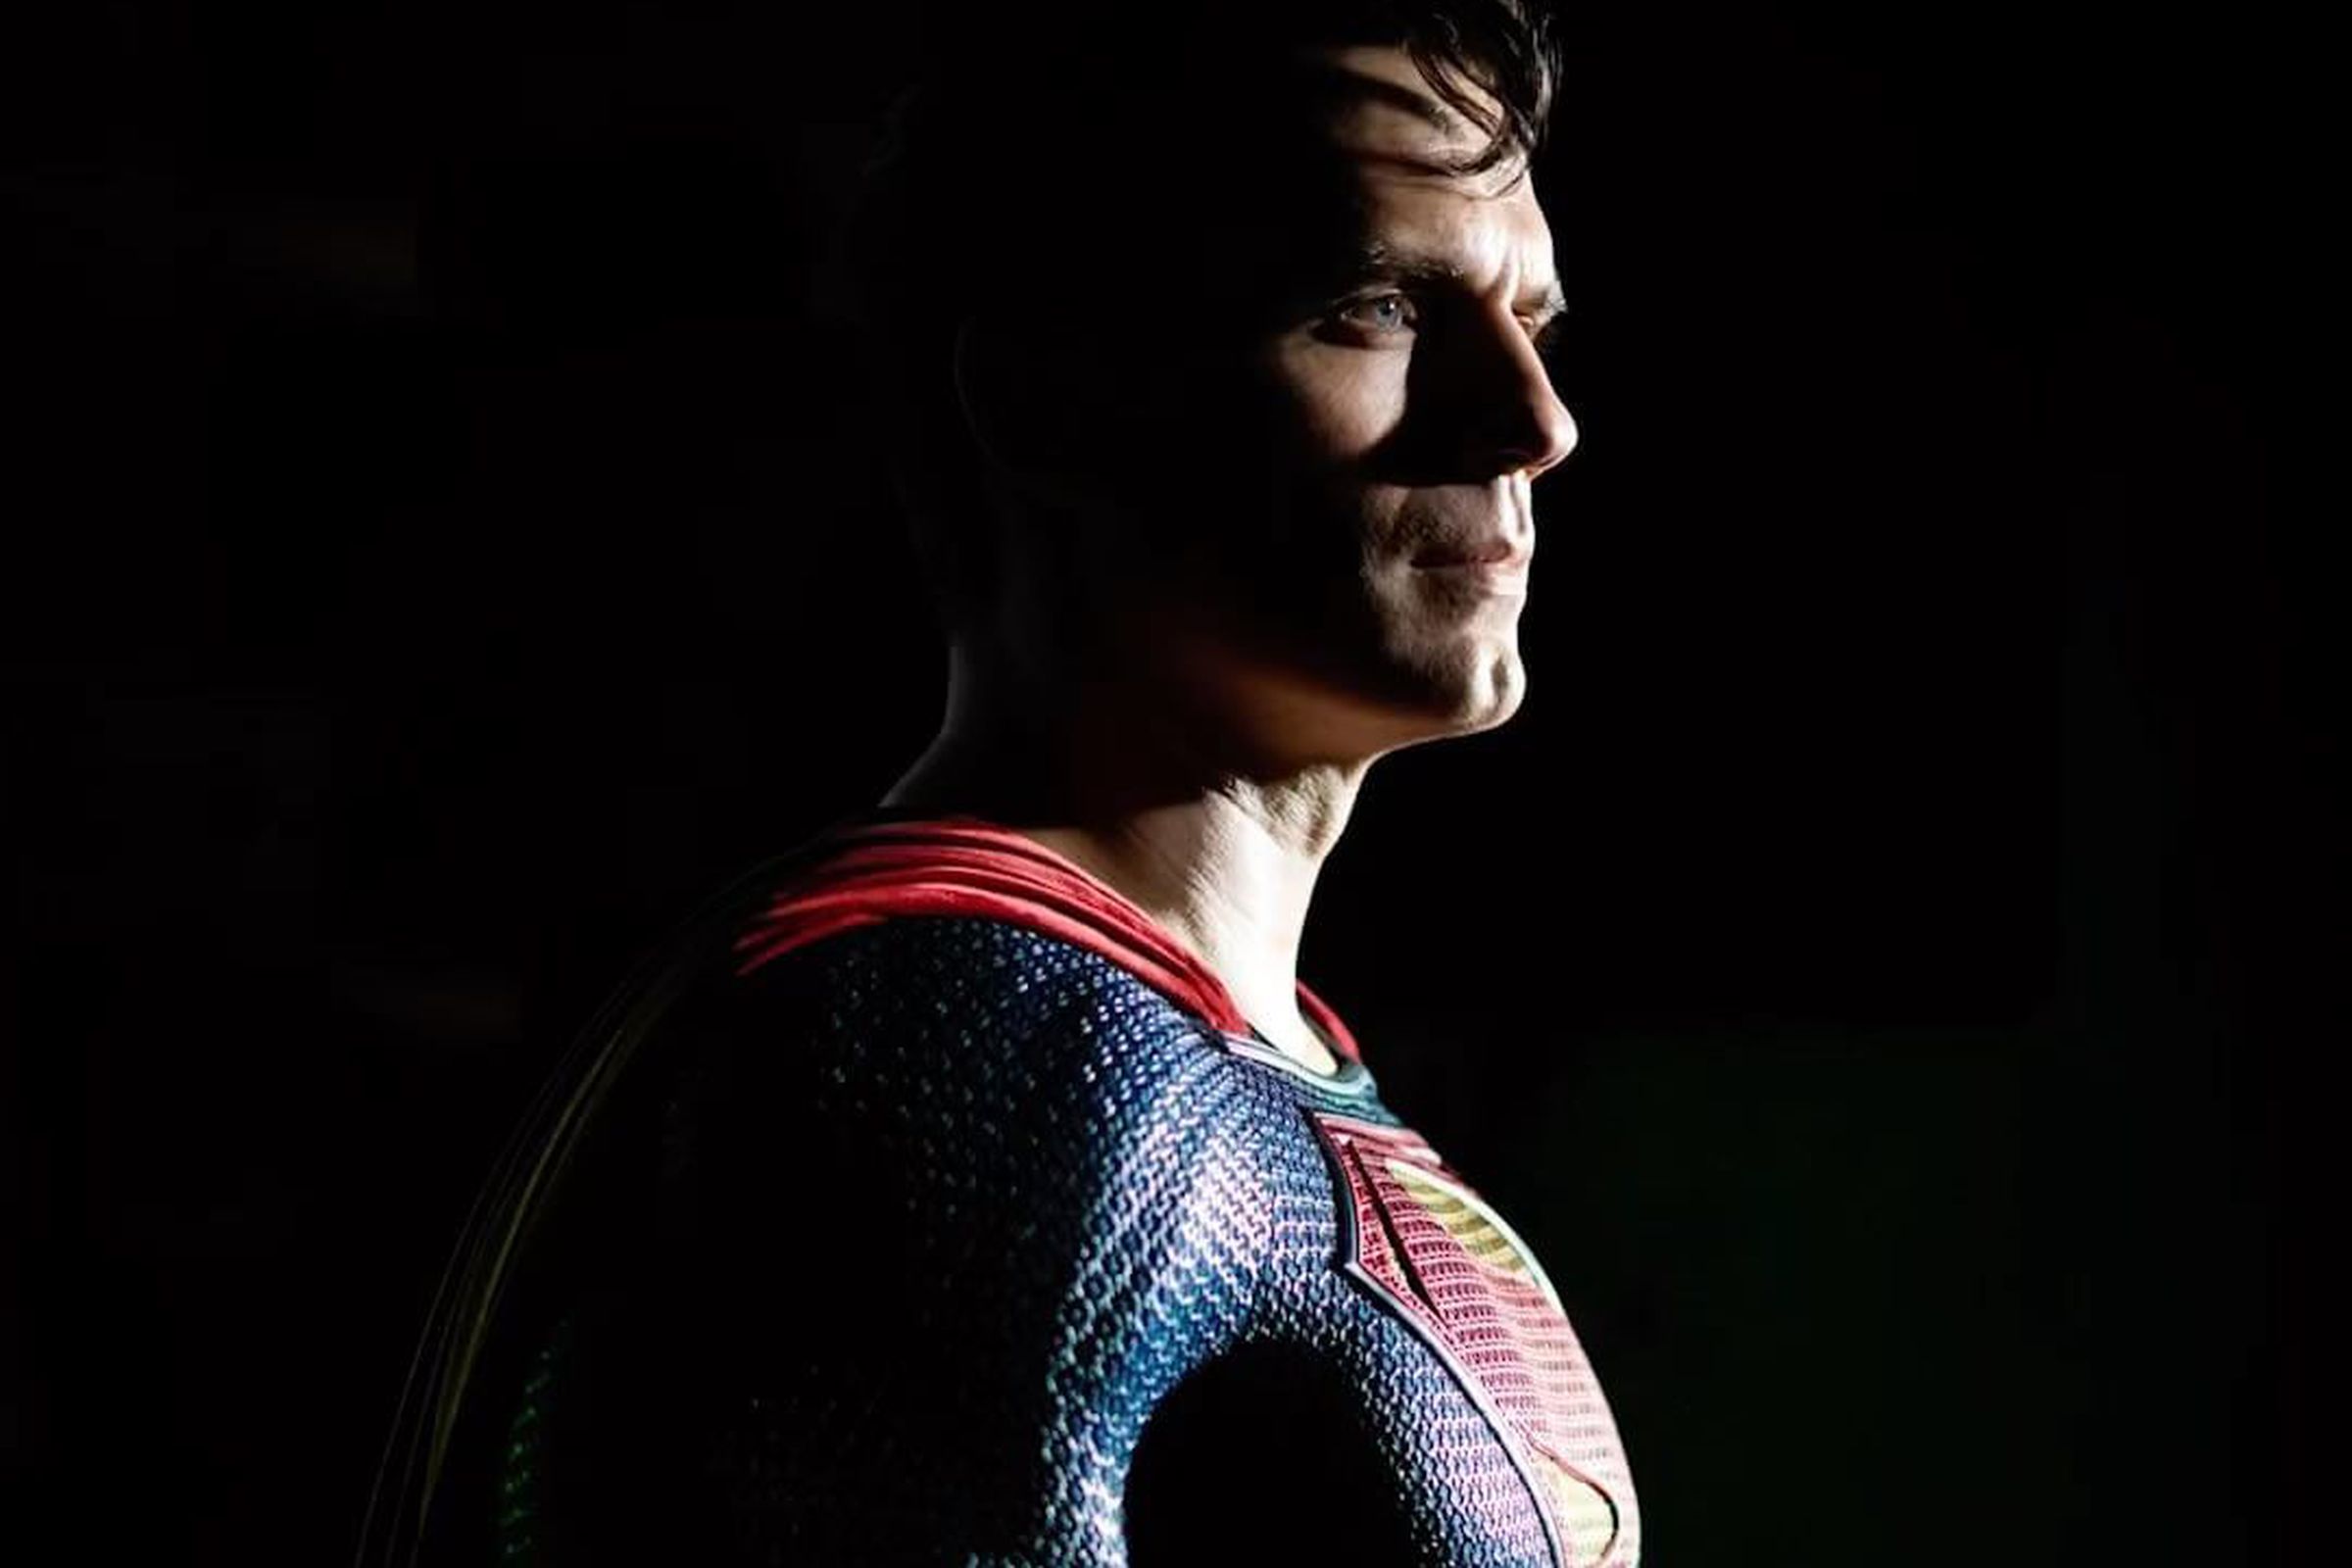 Photo of Henry Cavill dressed up as Superman, standing against a black background.